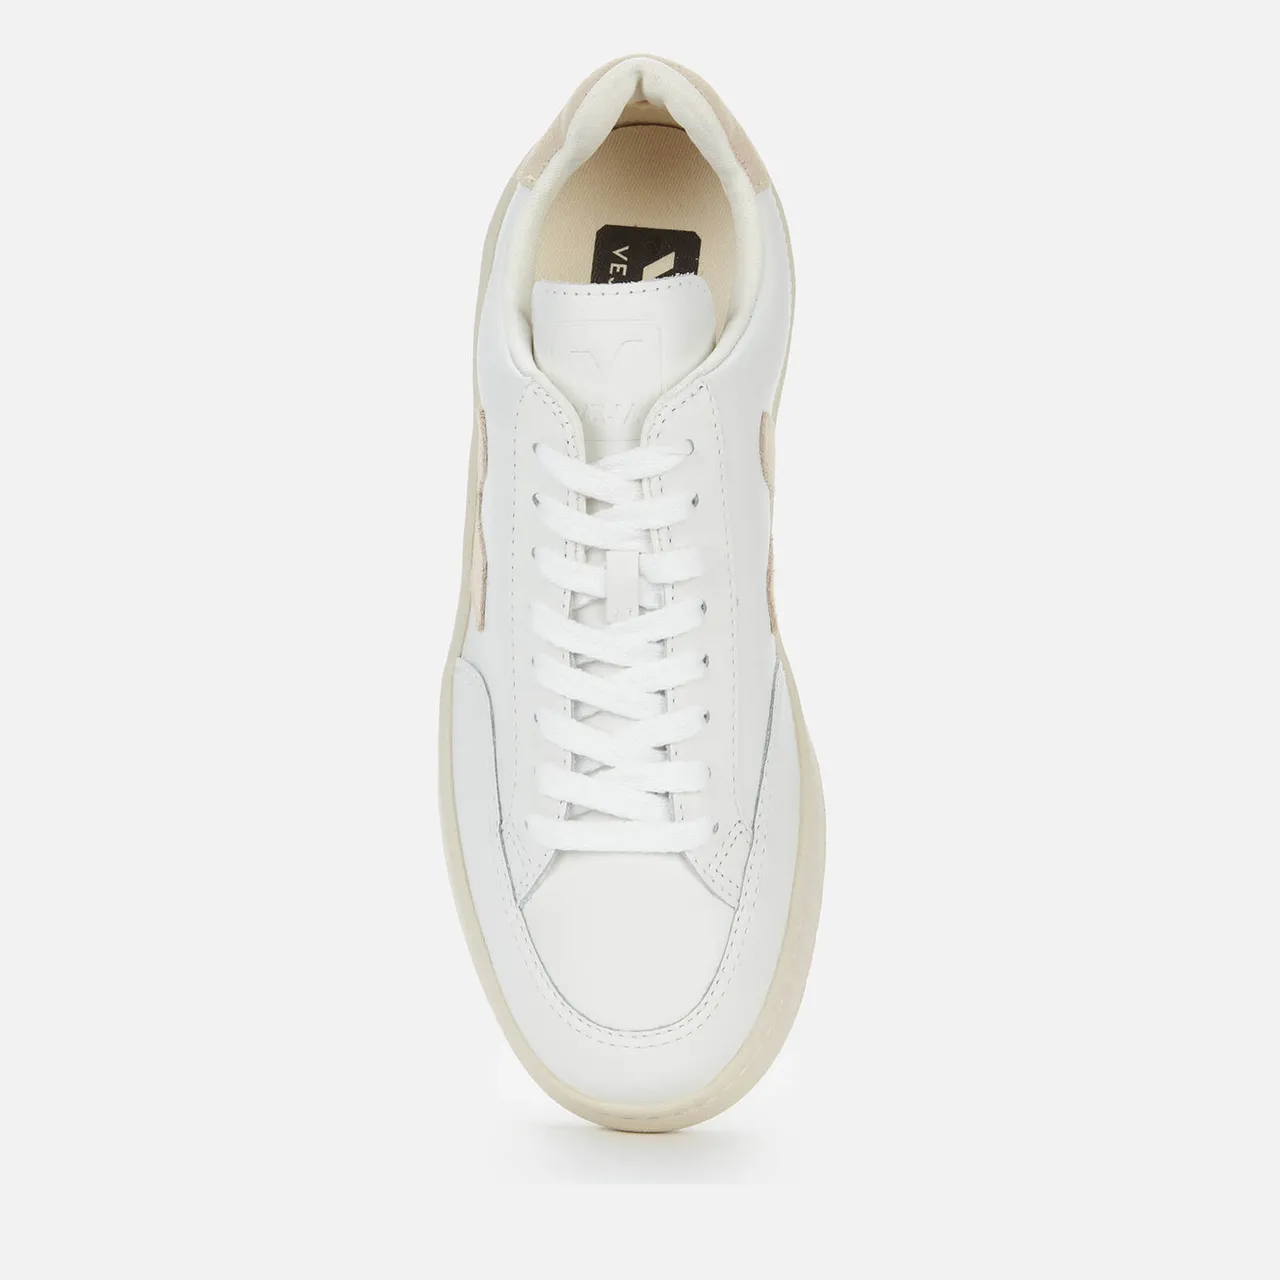 Veja Women's V-12 Leather Trainers - Extra White/Sable - UK